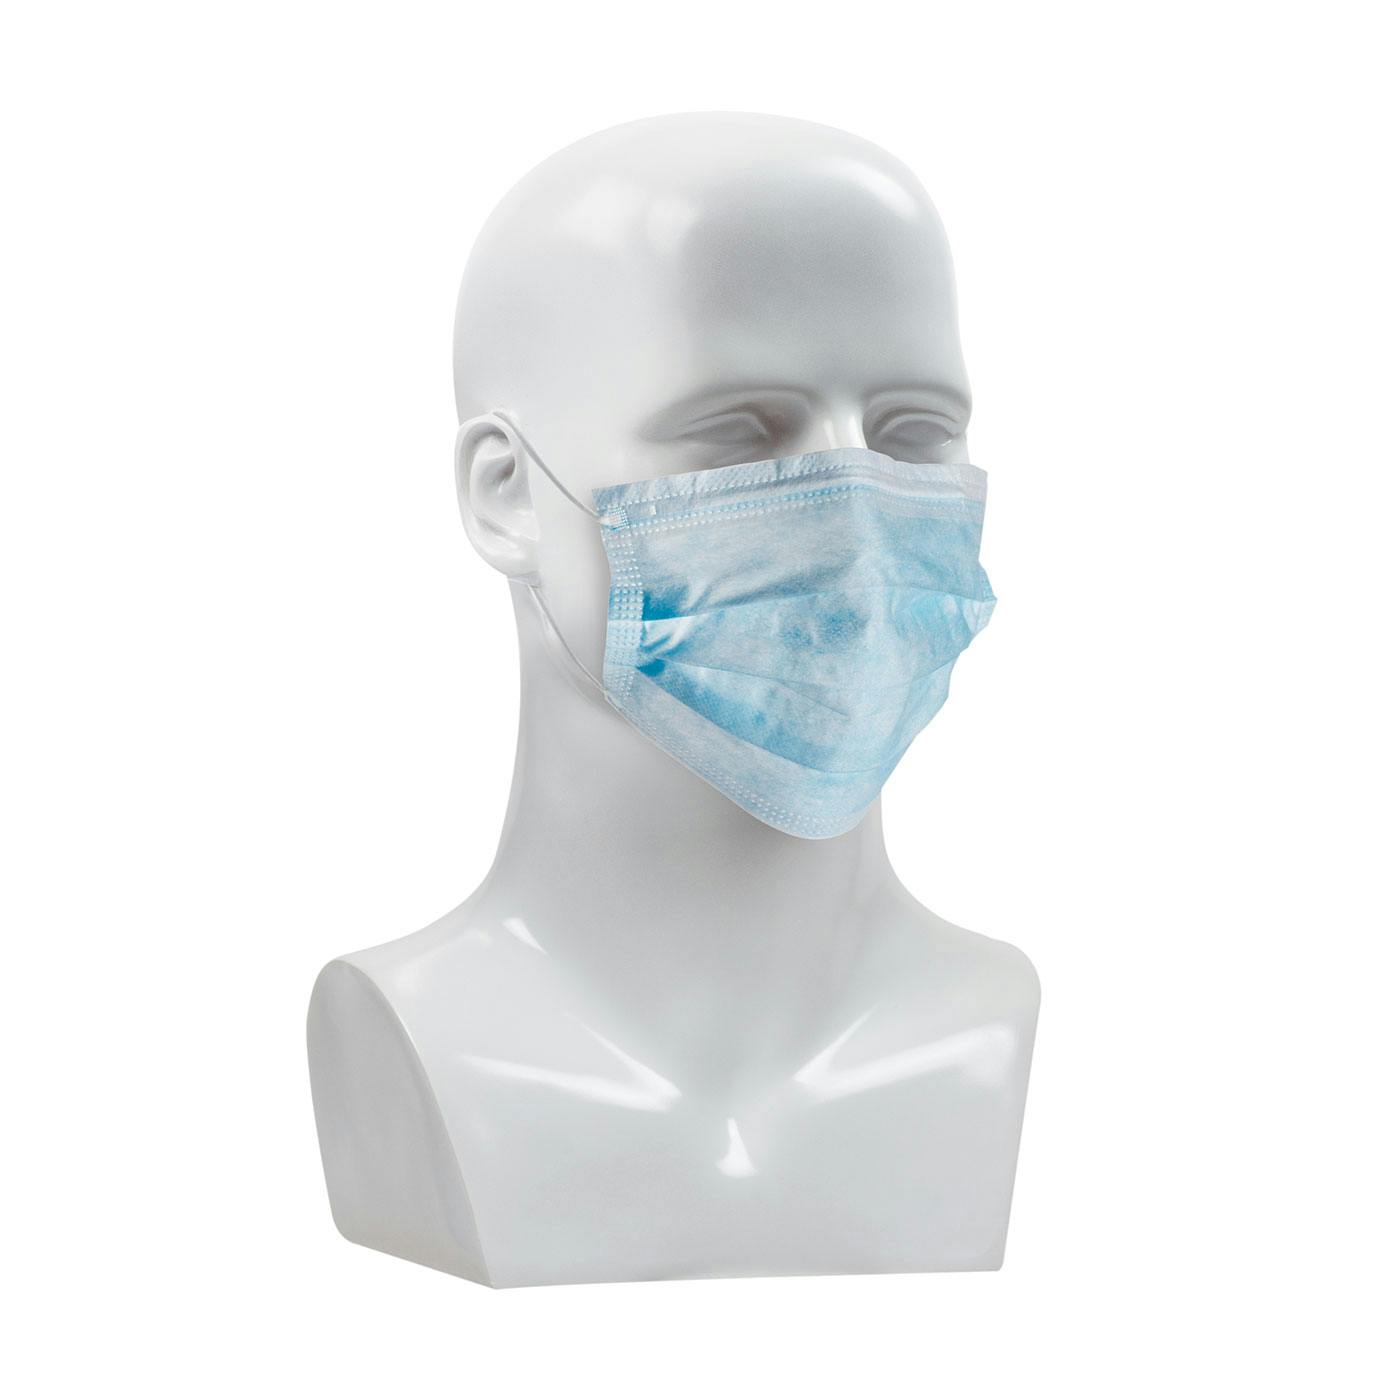 Disposable Face Mask - 50 Pack, Light Blue (270-4000) - OS